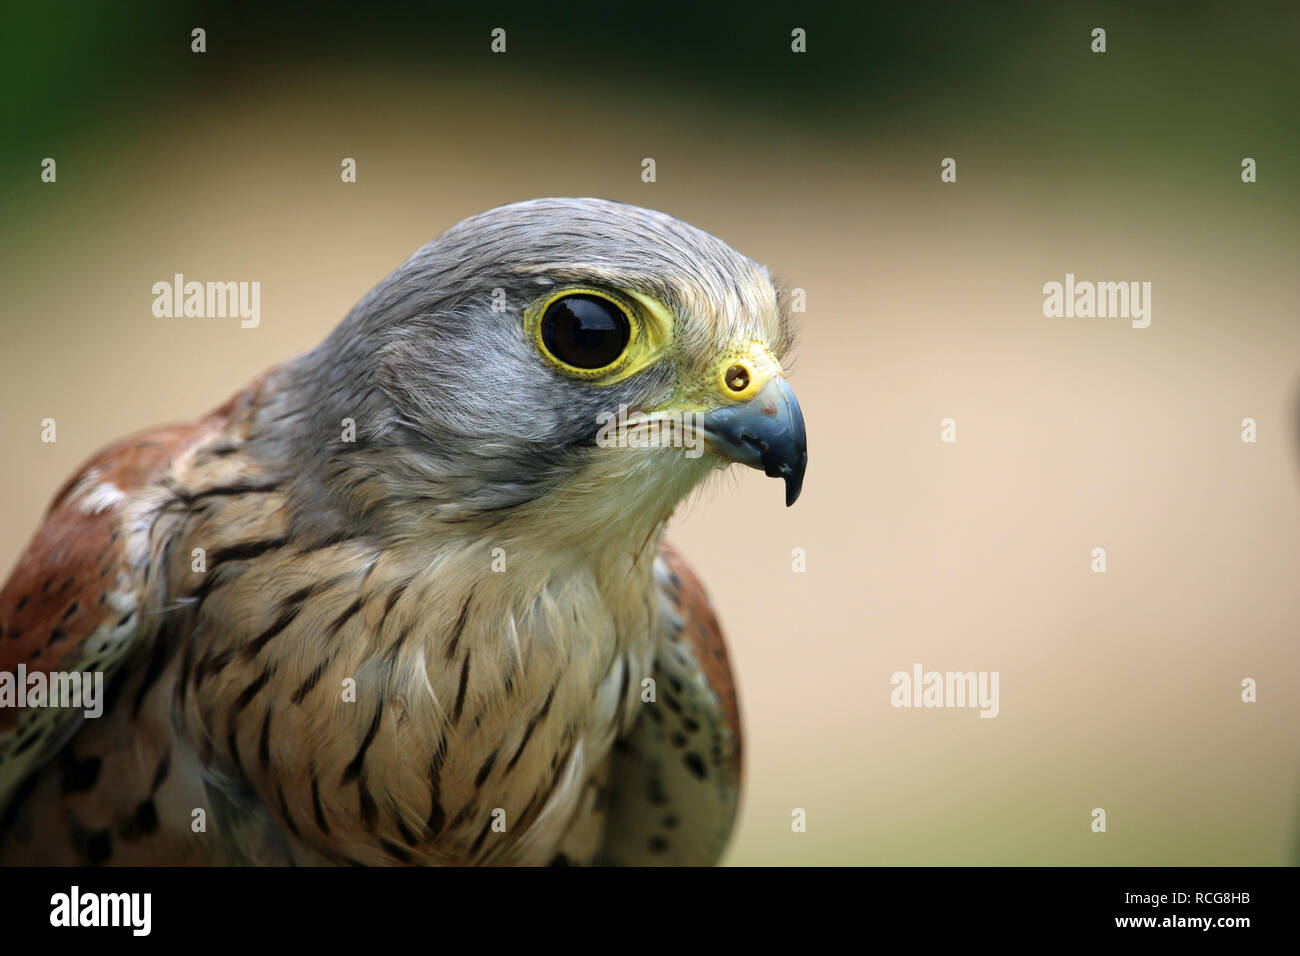 Head and shoulders of a kestrel (Falco tinnunculus) facing right with a green and brown blurred background. Stock Photo